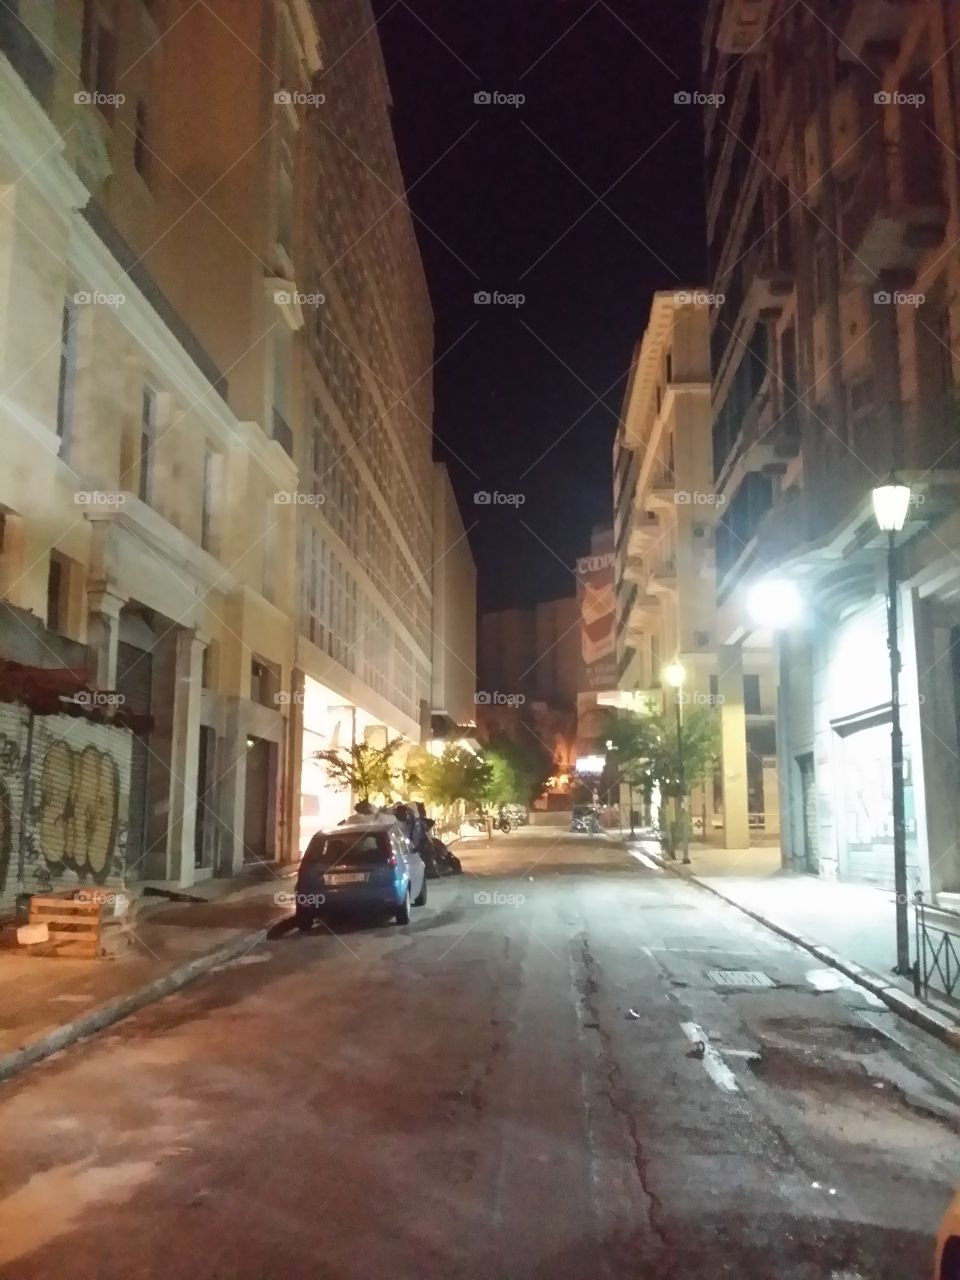 athens 2015. midnight in athens